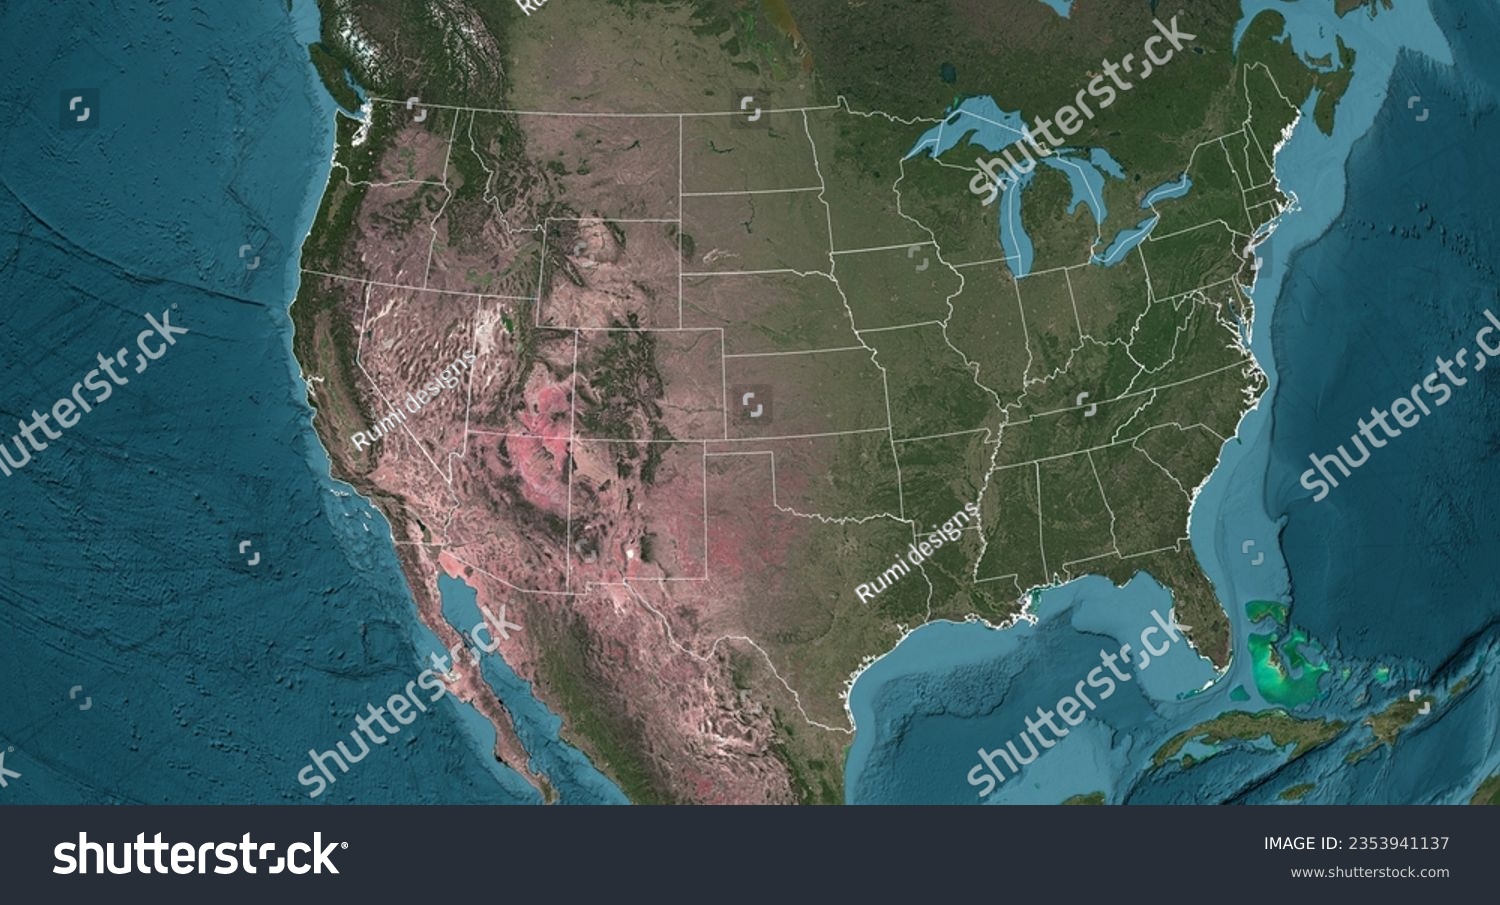 USA United States America HD satellite Image NASA with states outlines #2353941137